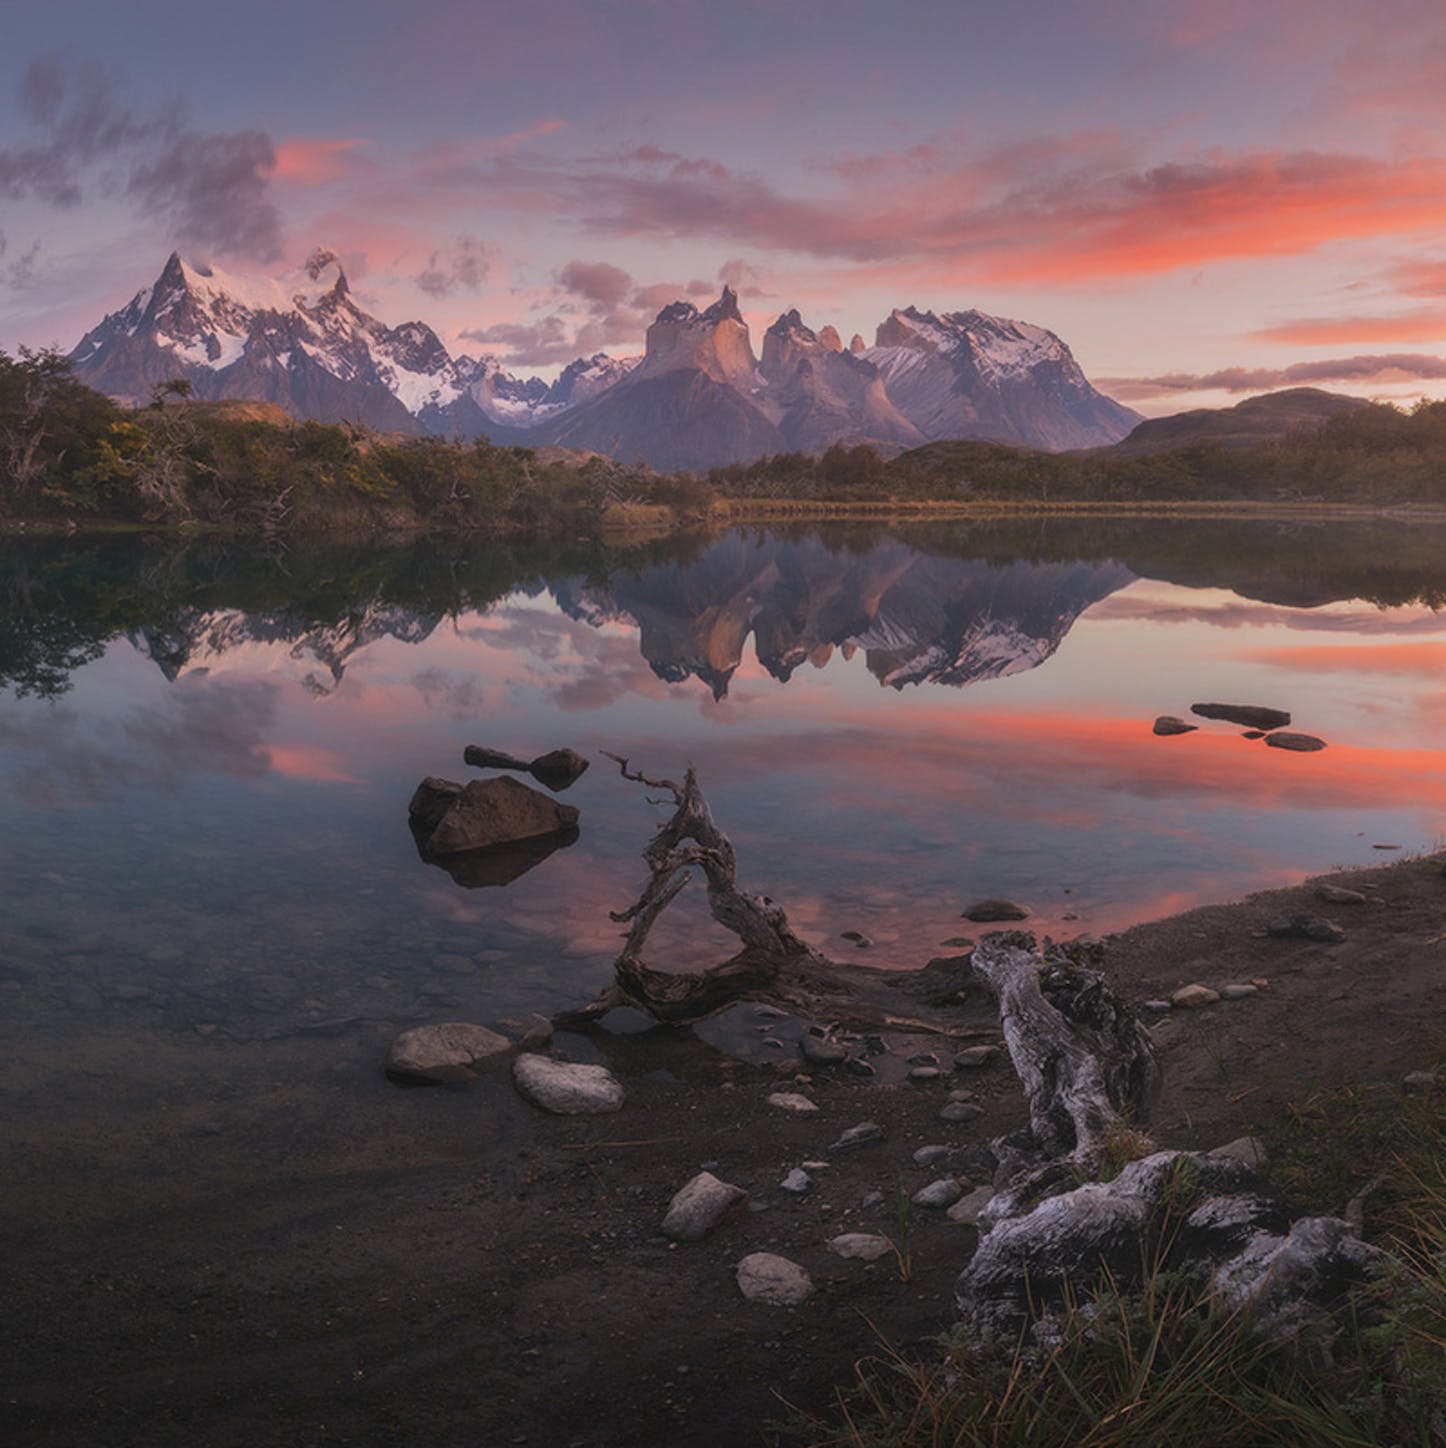 Patagonia Photo Workshop in Autumn - day 9